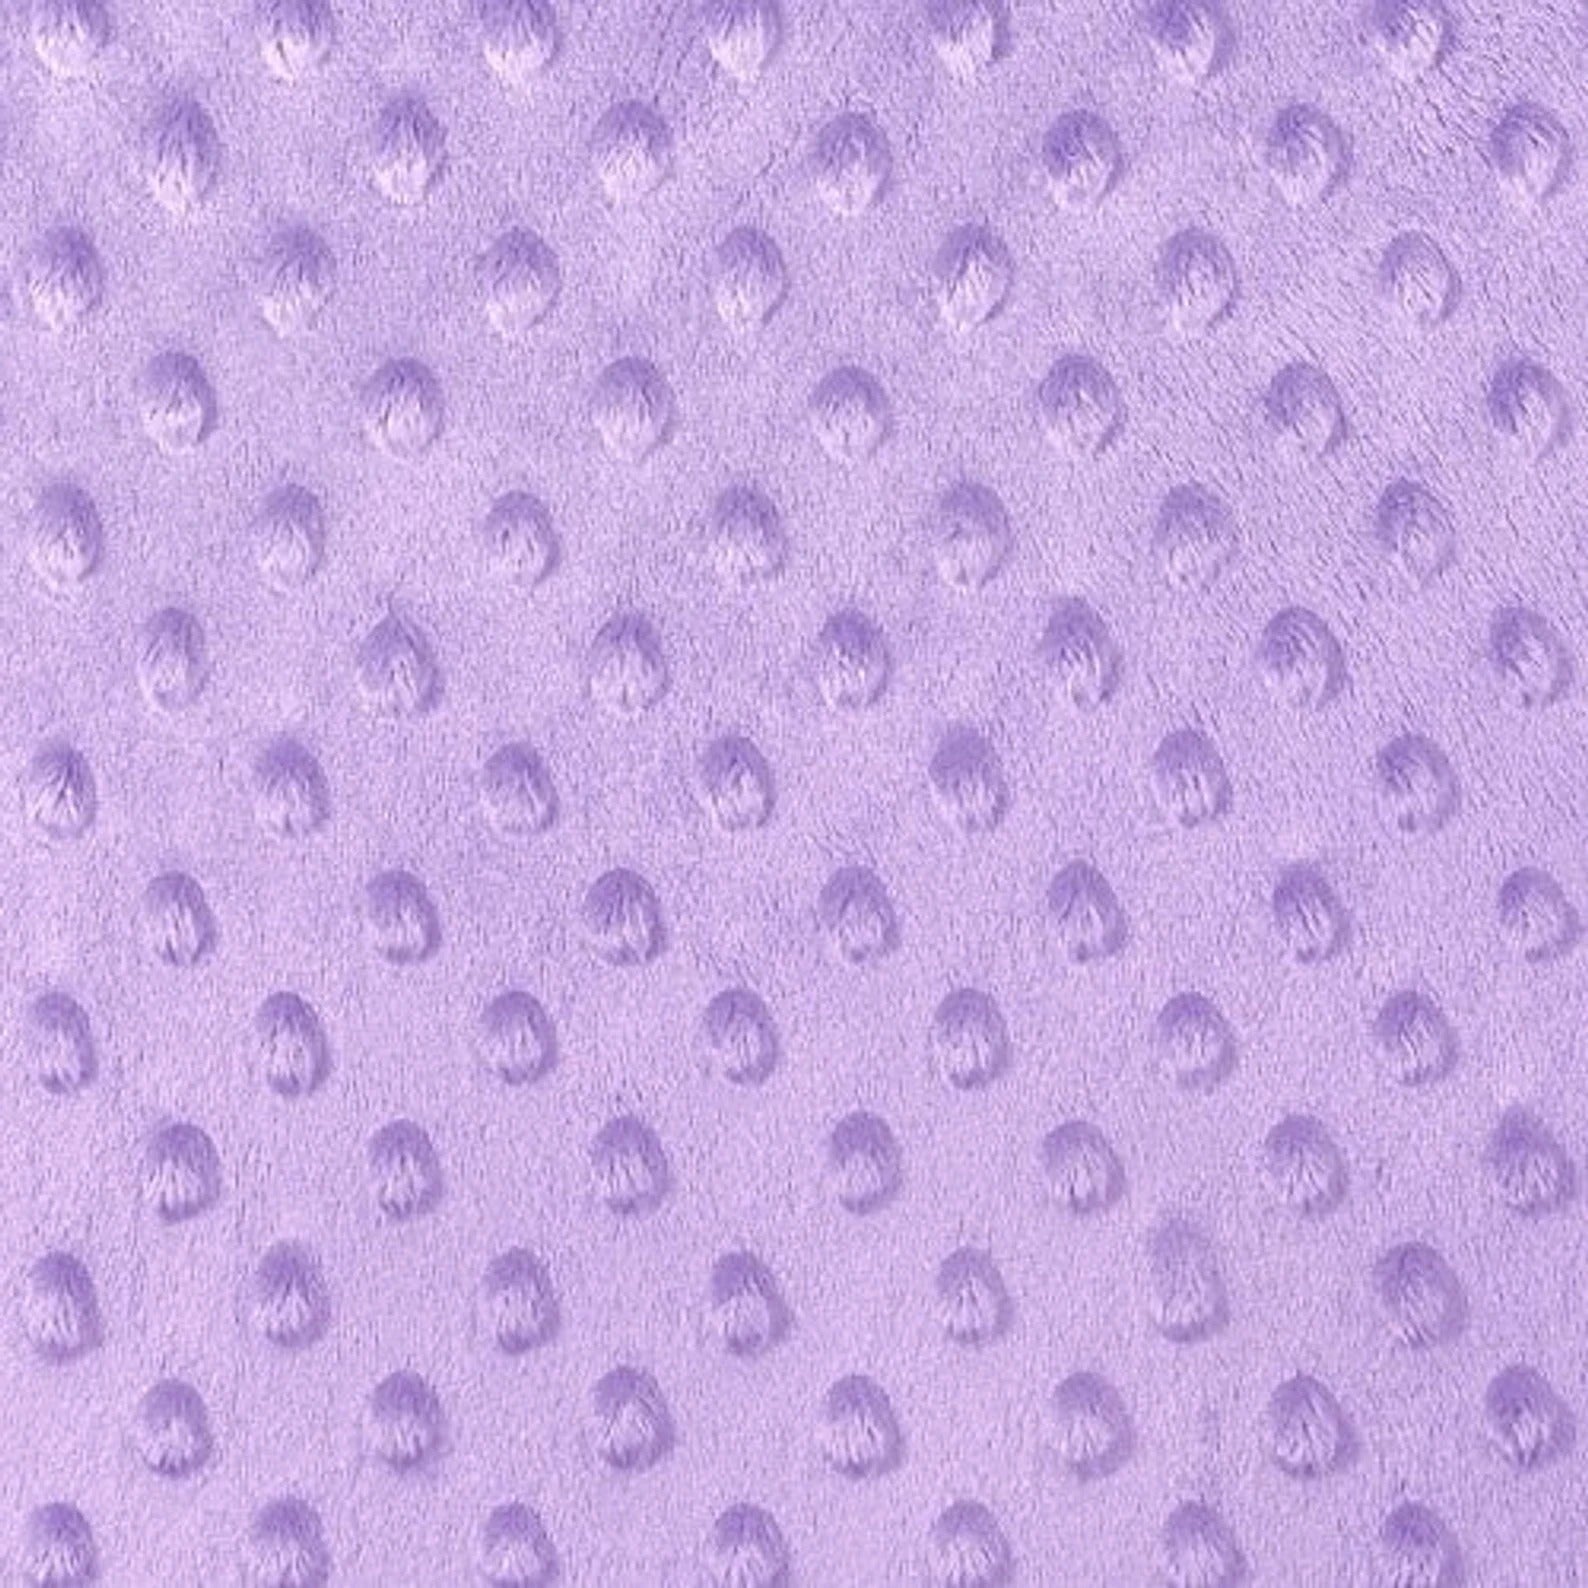 Dimple Dot Minky Fabric Sold By The Yard - 36"/ 58" Lilac